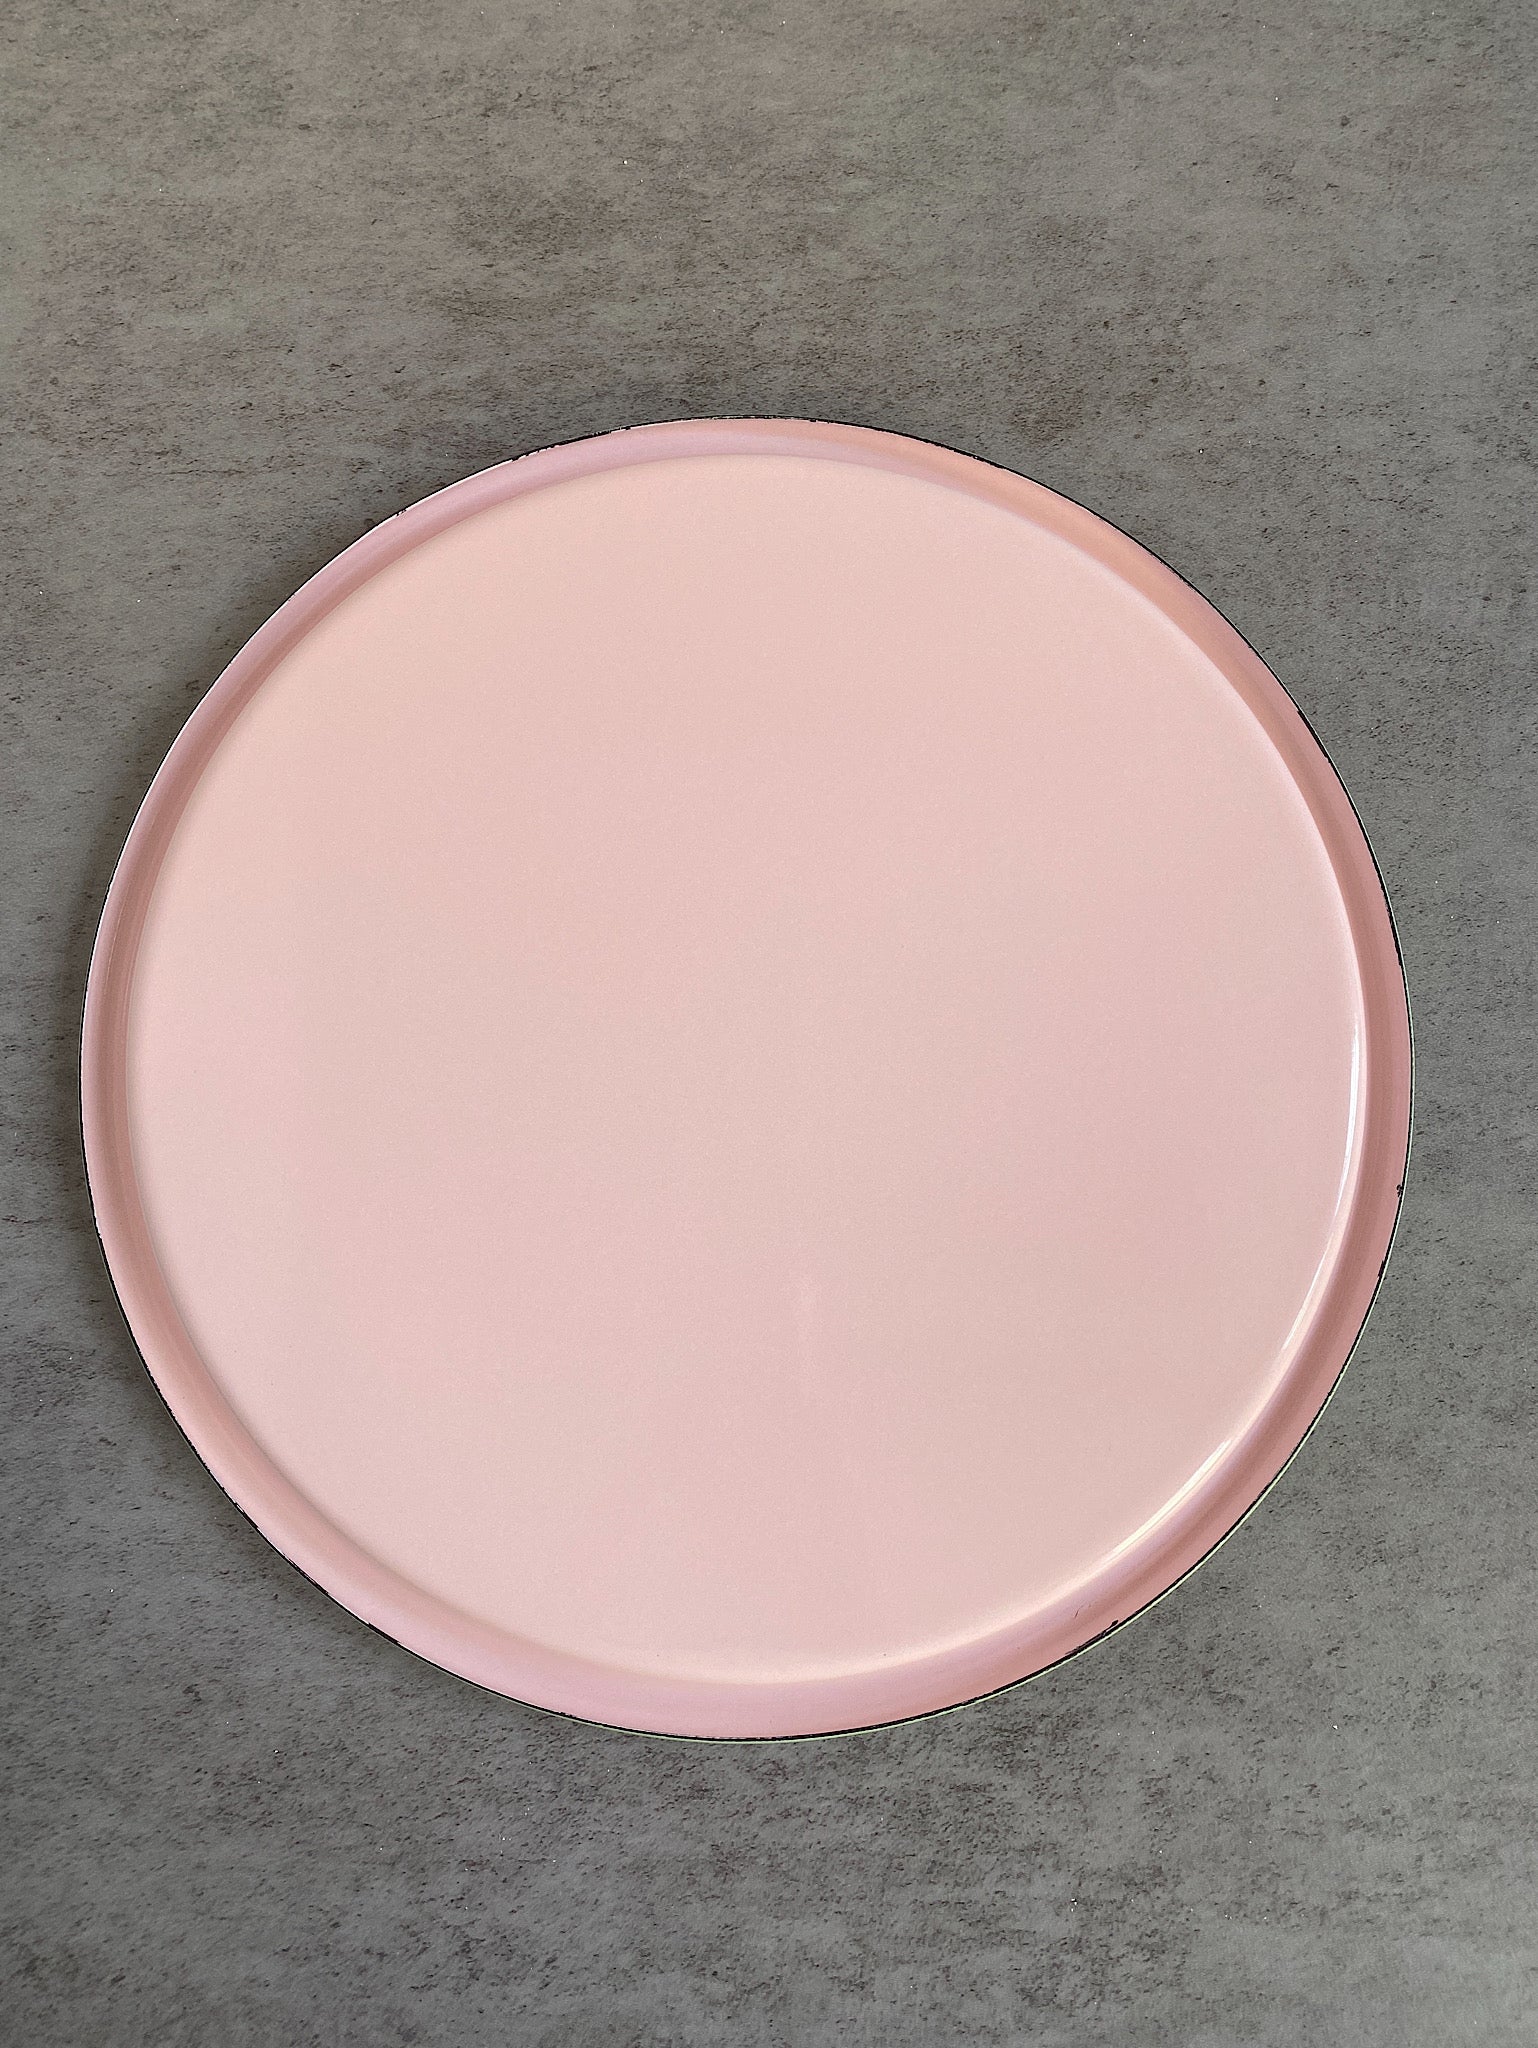 Limited Edition Enamel Pizza Plate by Always Sunday